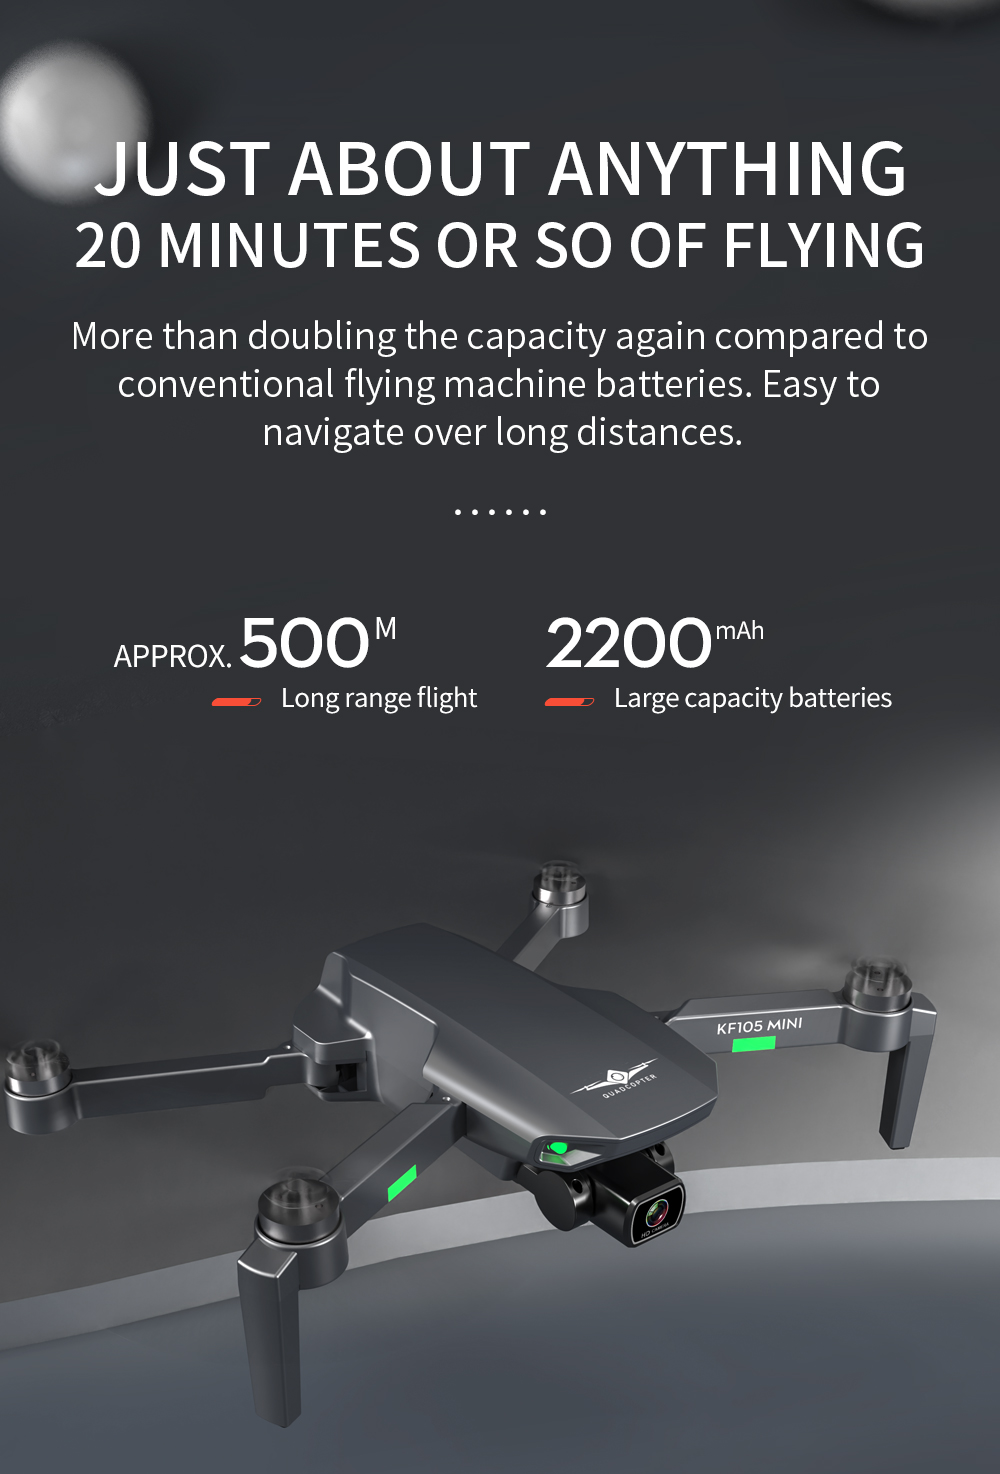 KF-KF105-GPS-5G-WiFi-FPV-with-4K-HD-ESC-Dual-Camera-Visual-Obstacle-Avoidance-Brushless-Foldable-RC--1916966-11